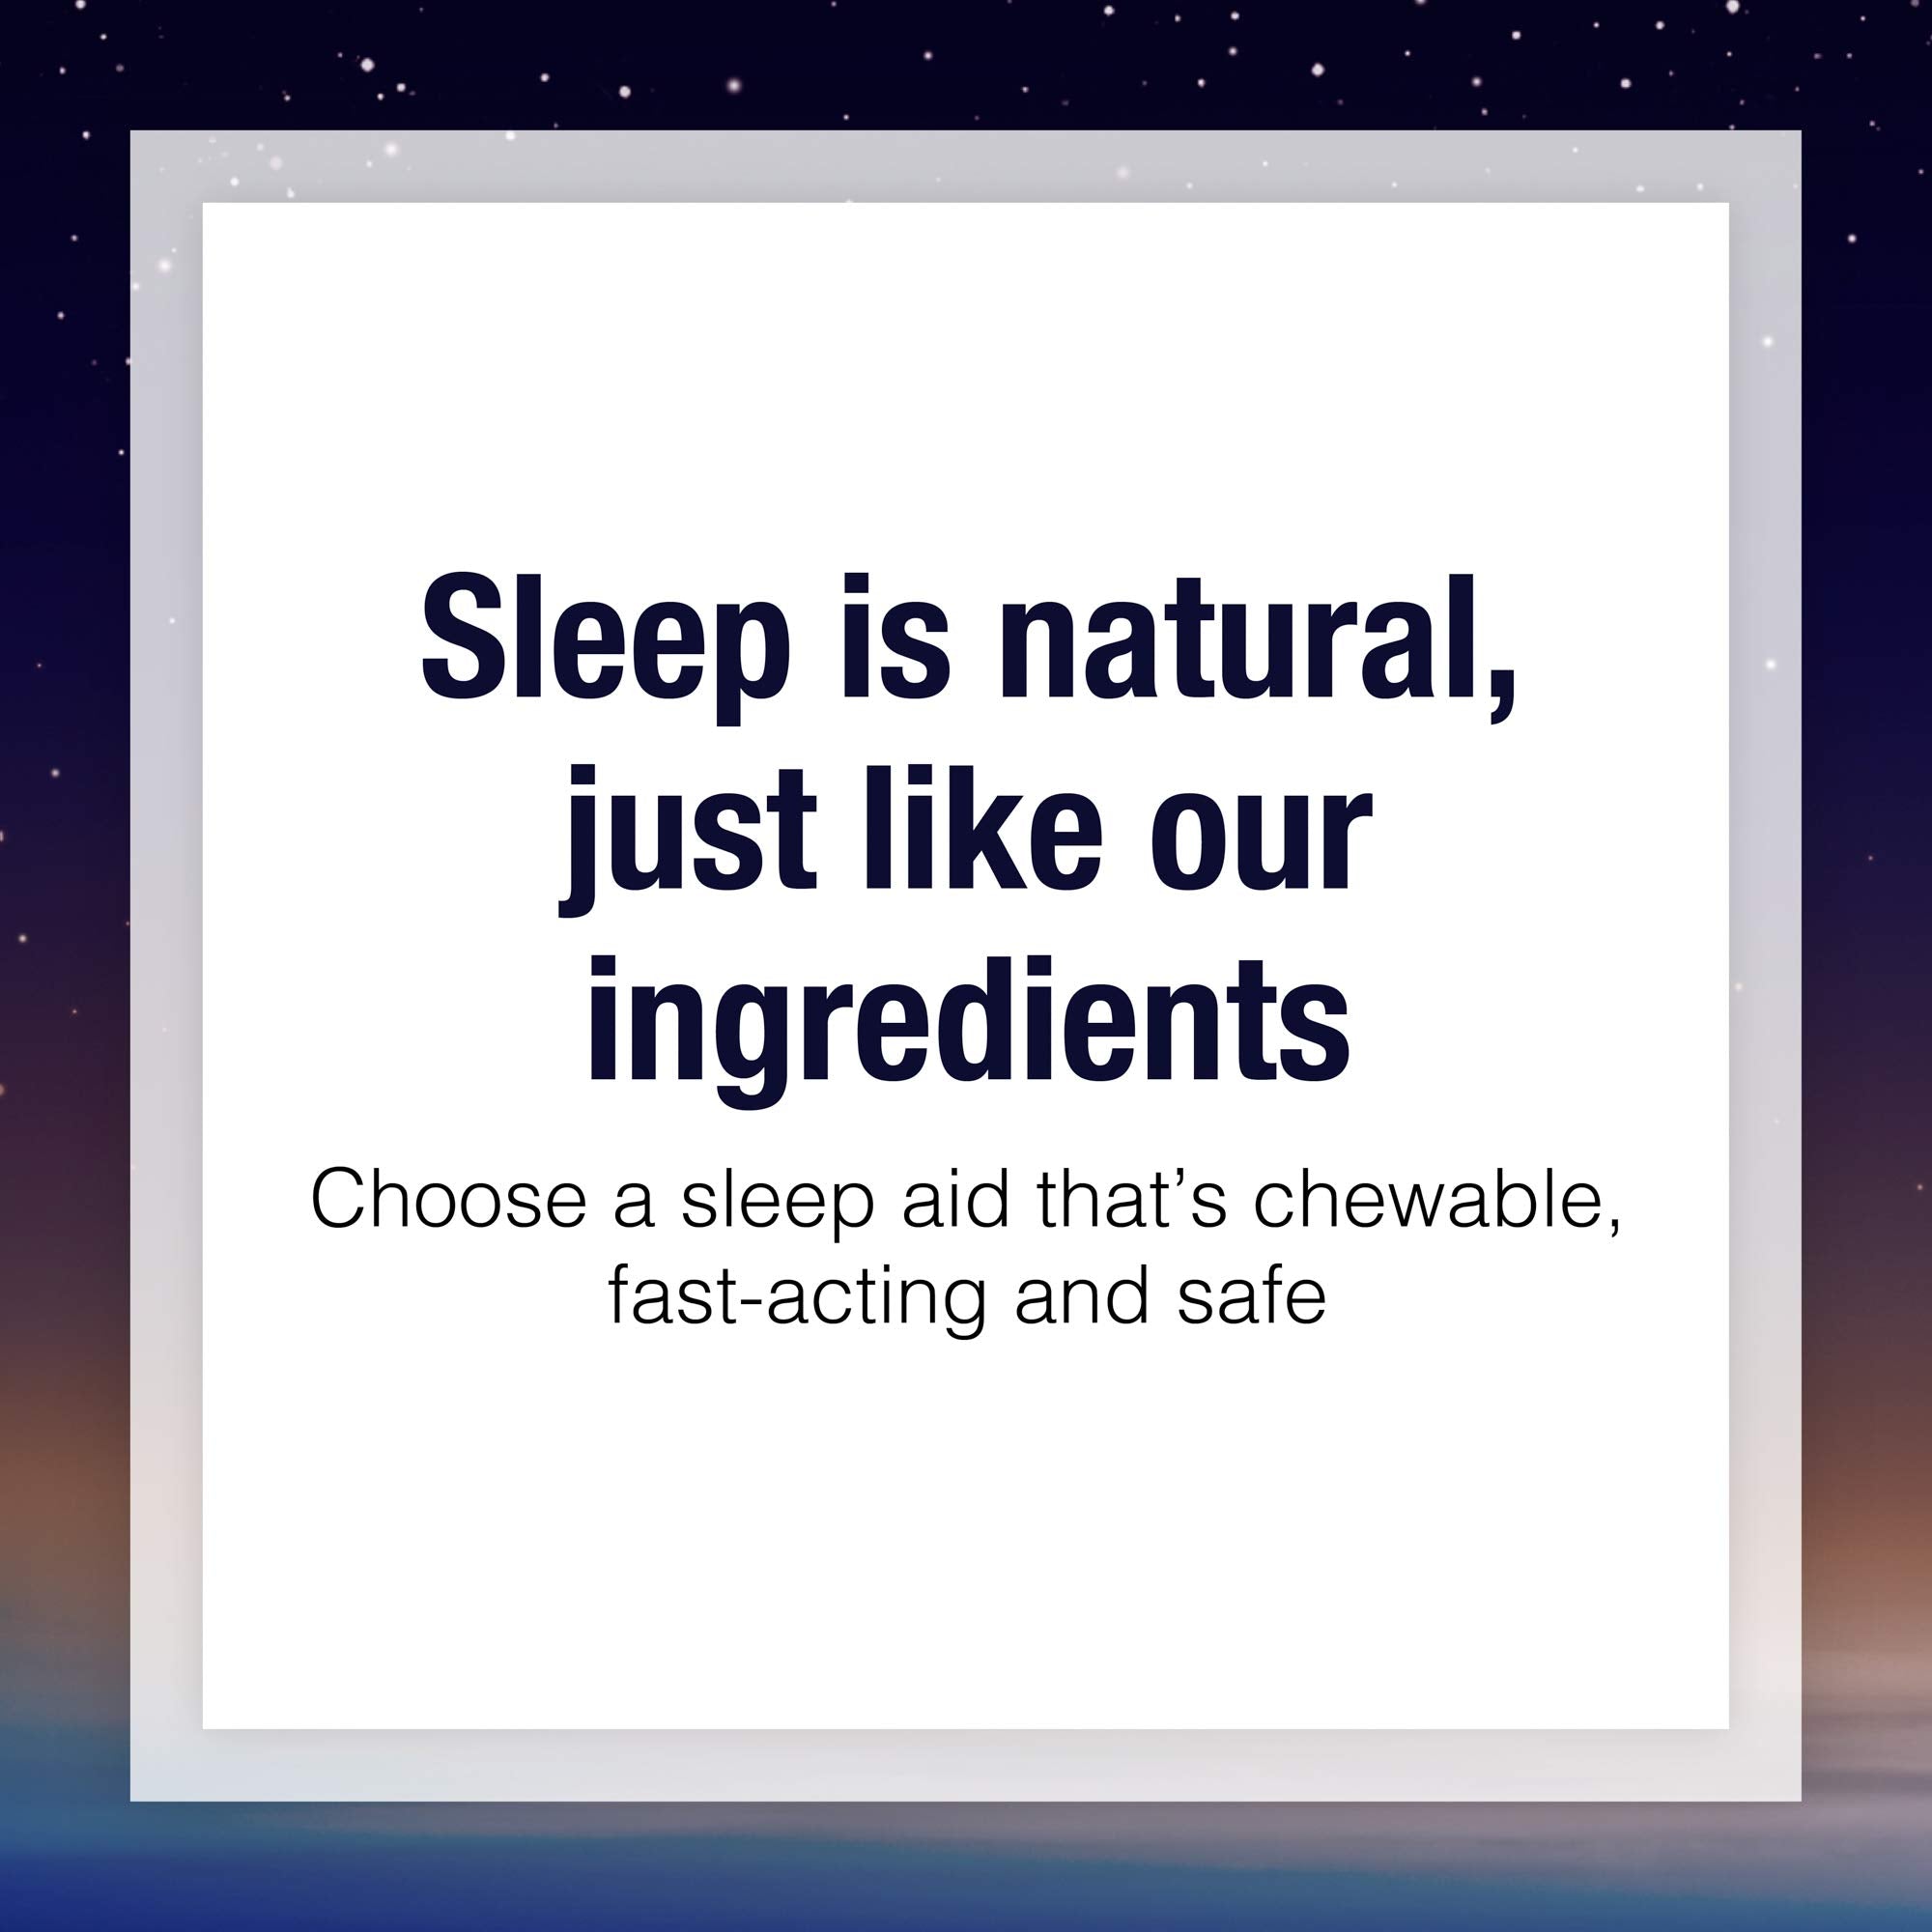 Natural Factors Stress-Relax Tranquil Sleep Extra Strength